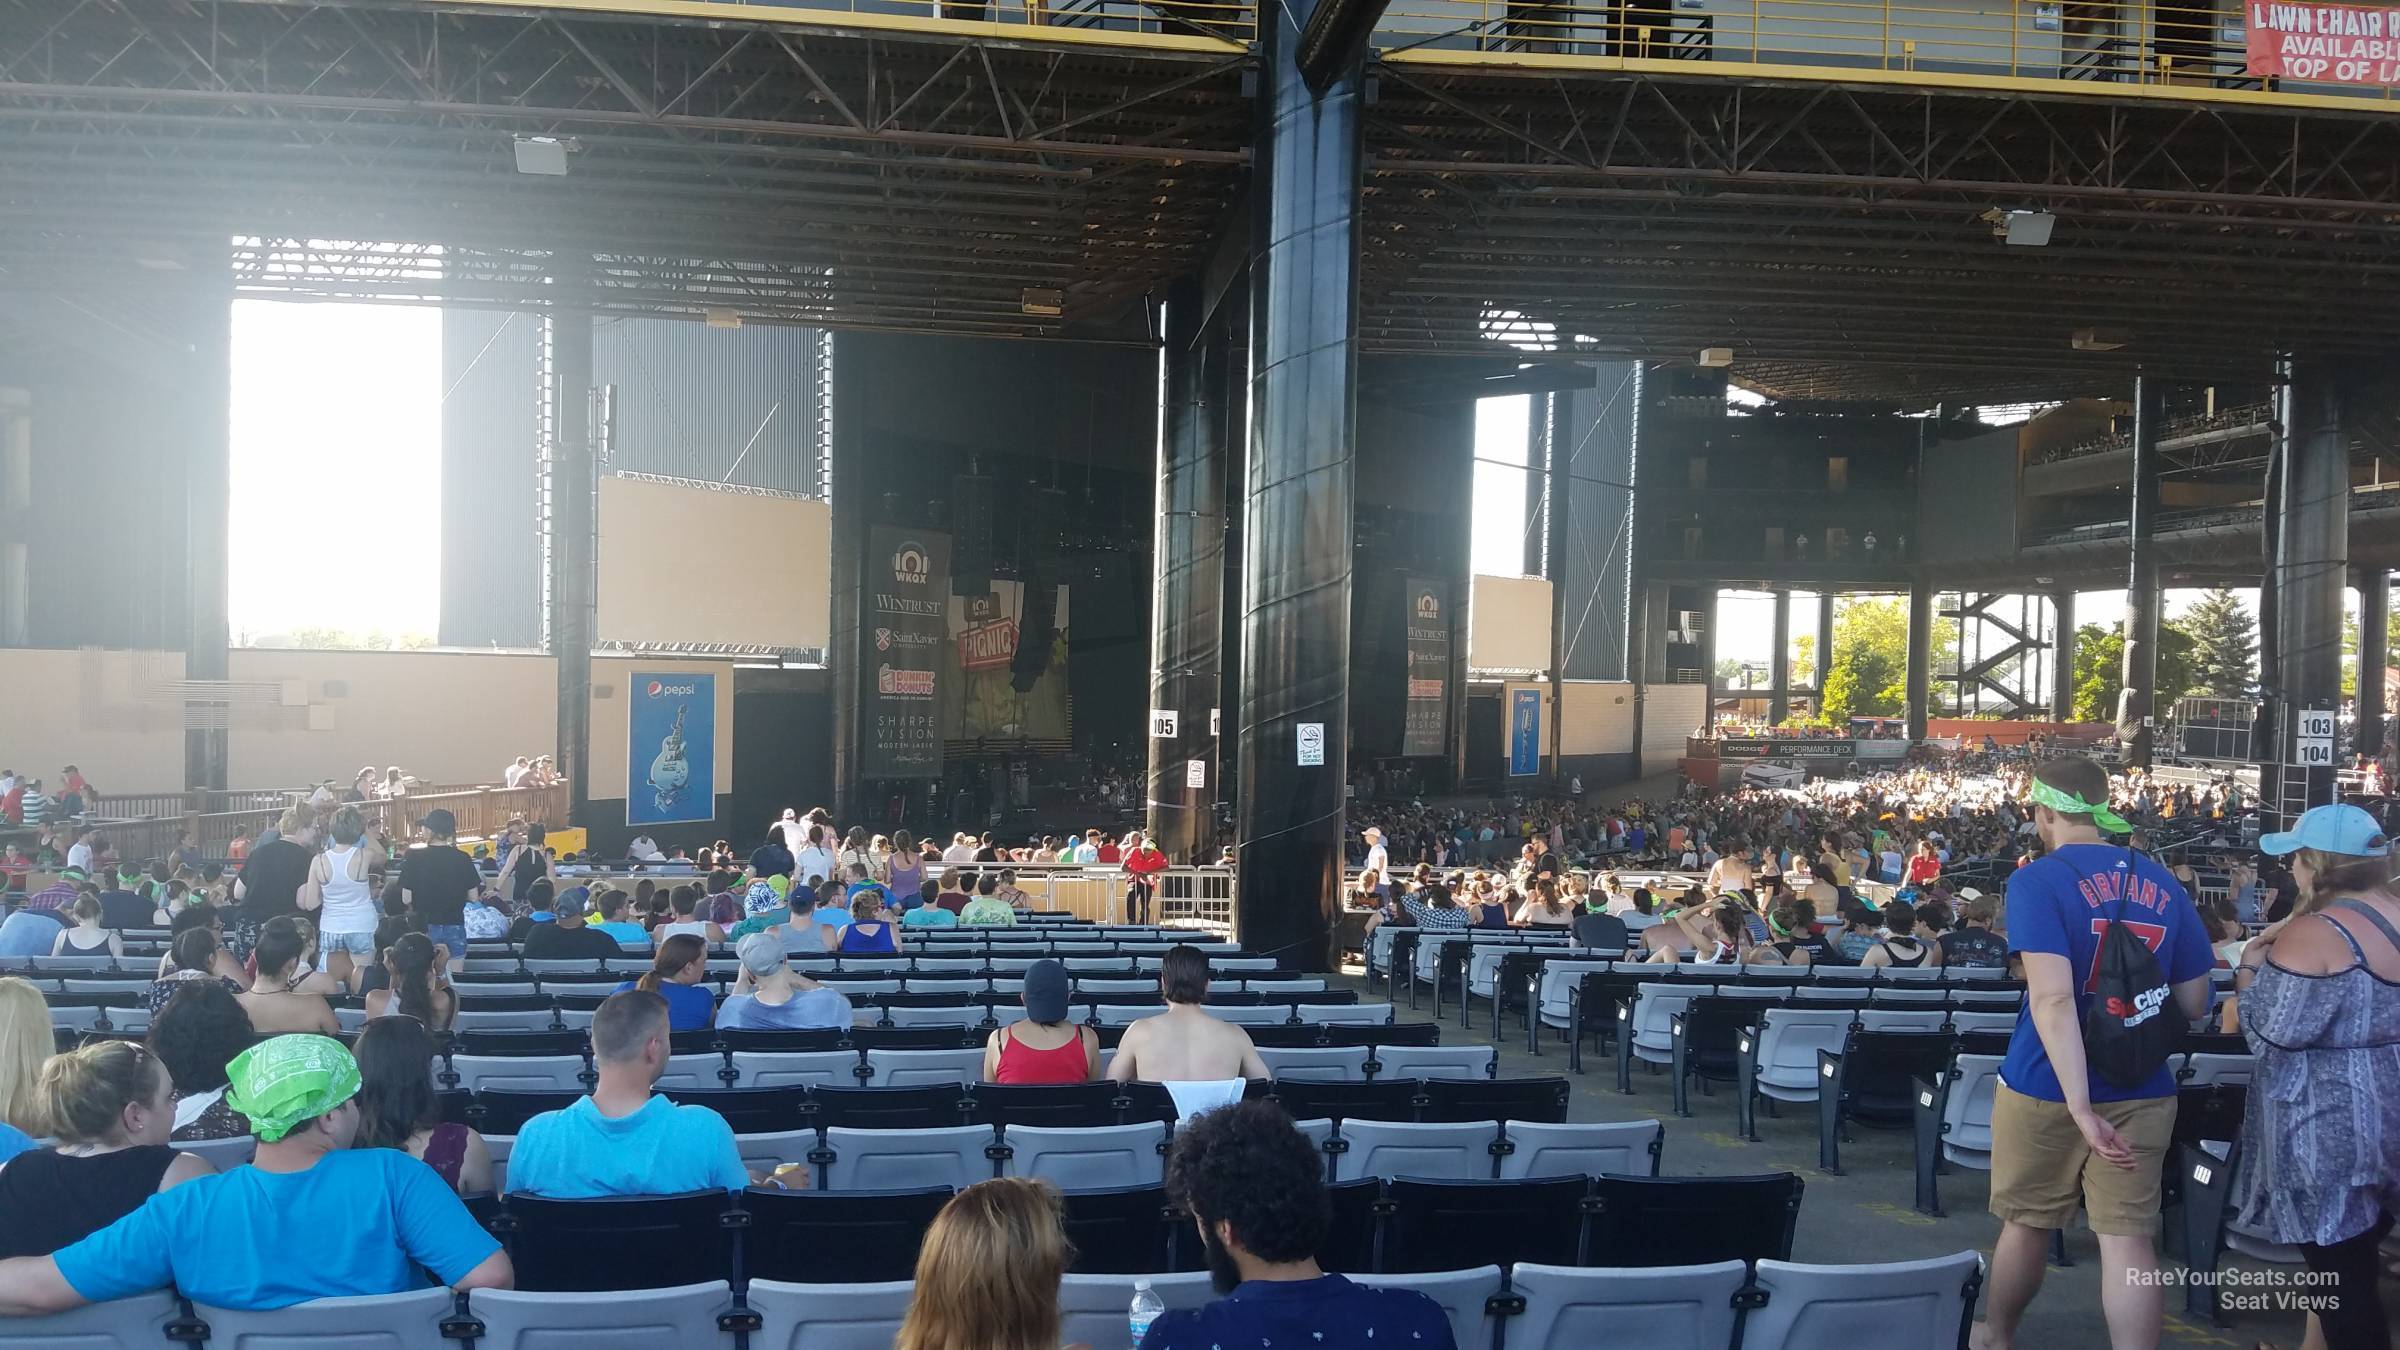 hollywood casino amphitheater seating chart section 206